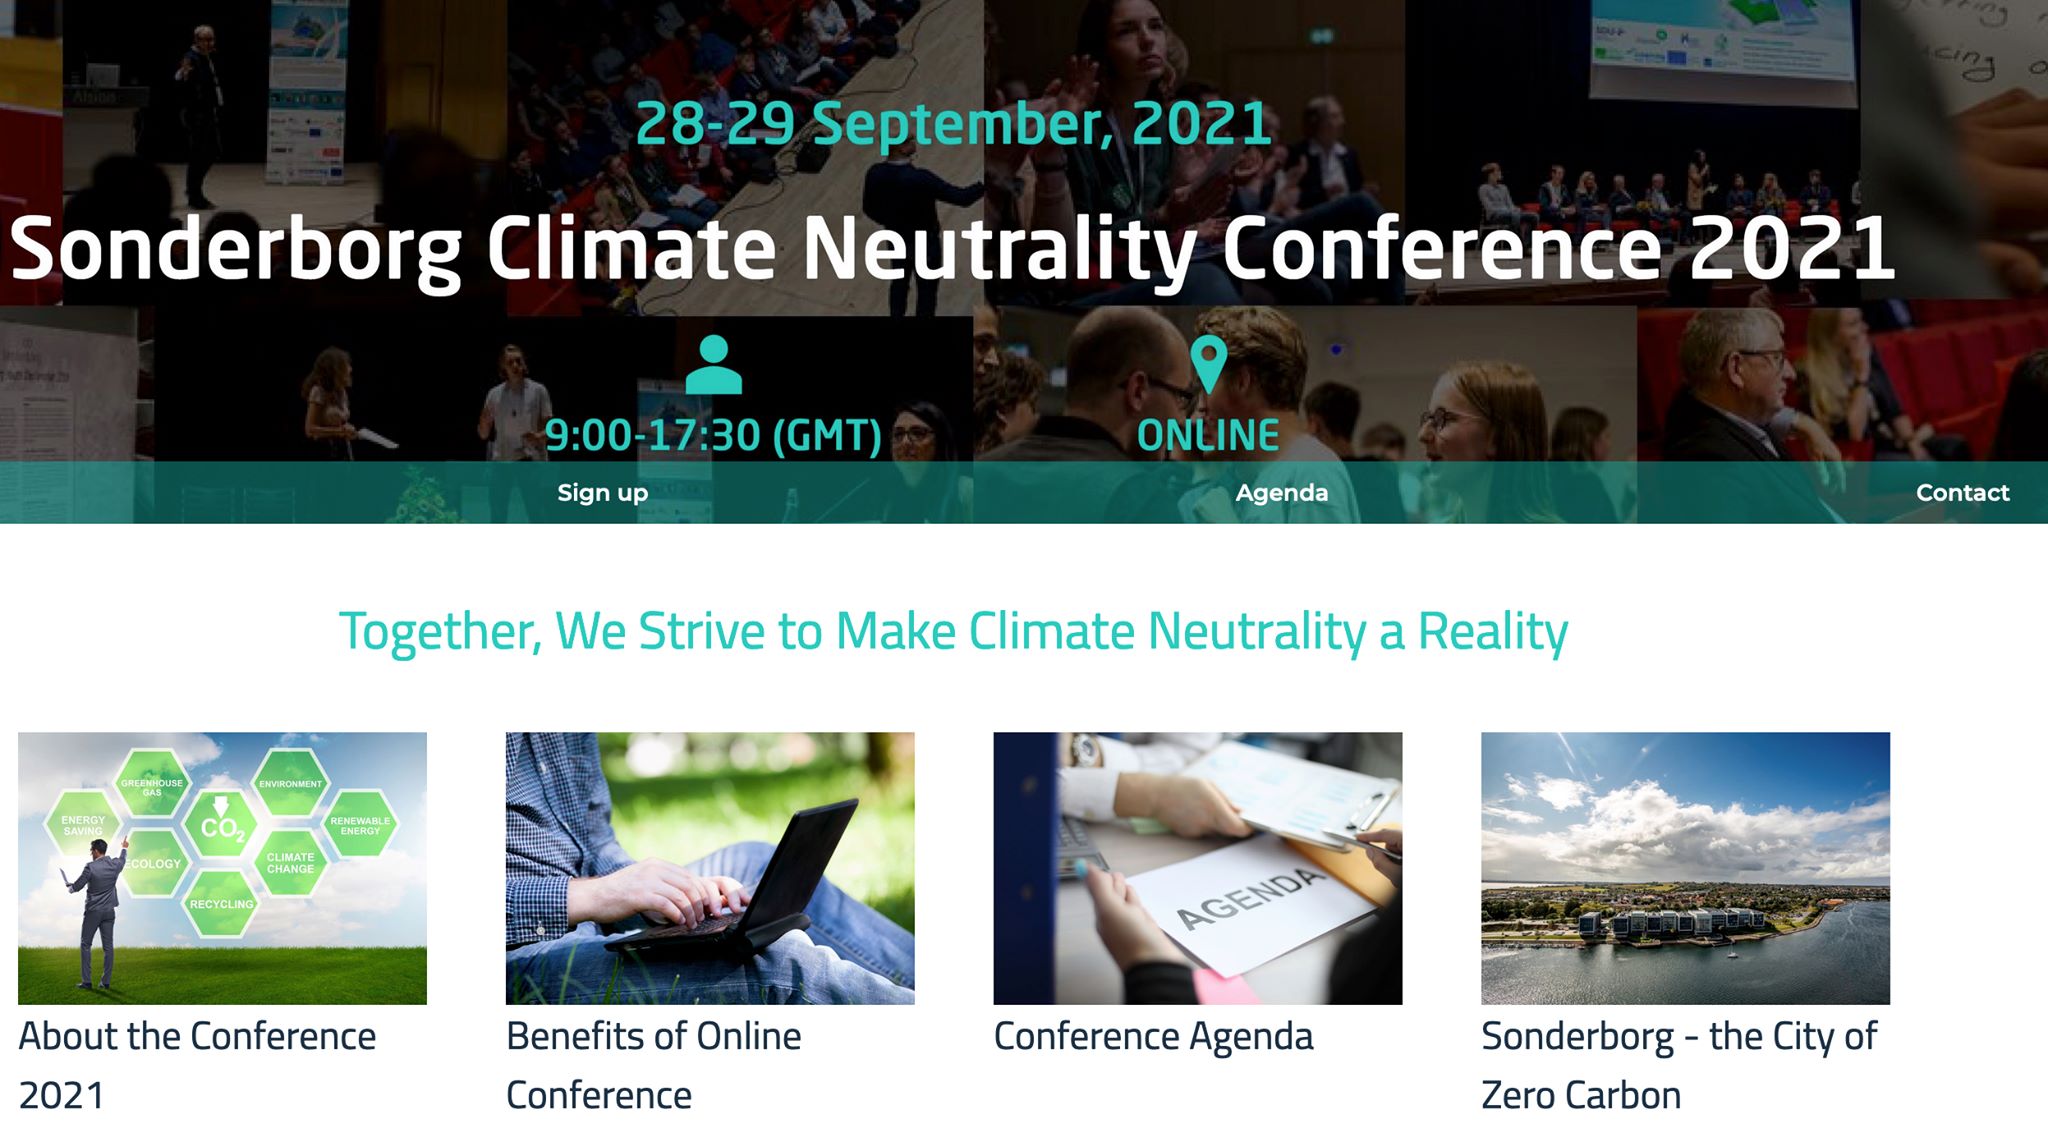 Sonderborg Climate Neutrality Conference 2021